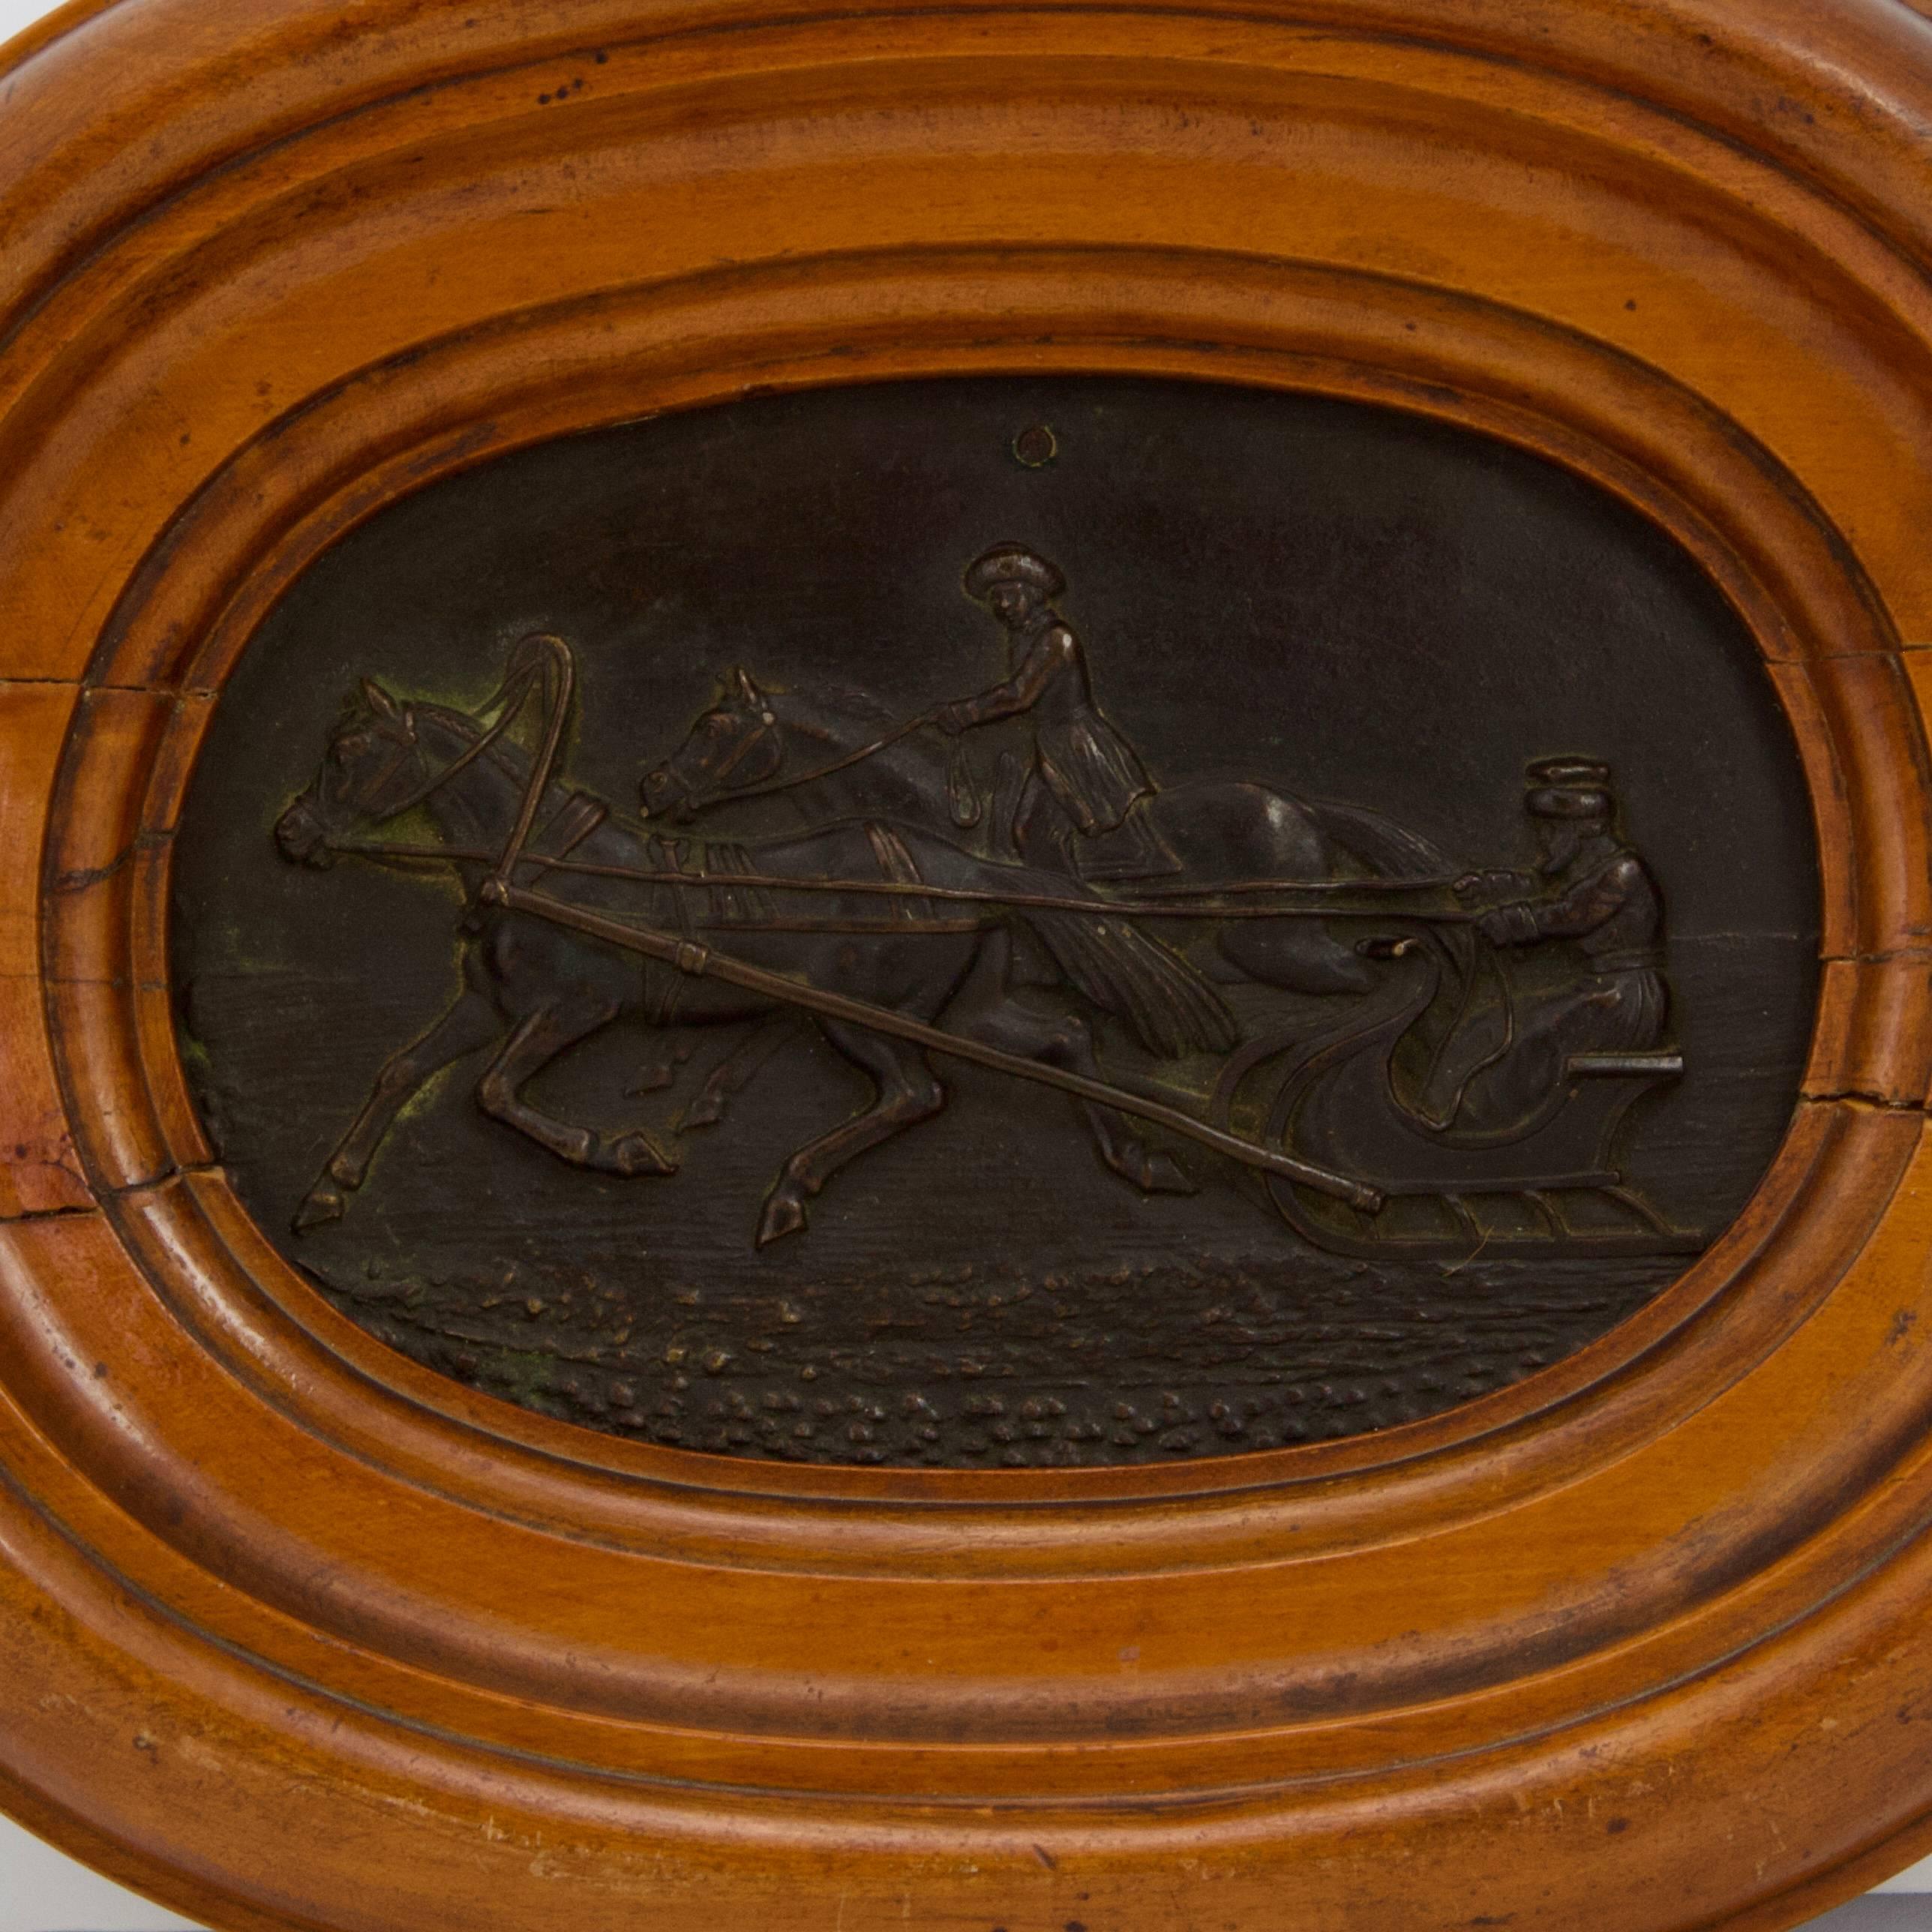 Oval bronze representing a troika driving to the forefront and on a backdrop an horse rider. Originally with an hole. Dark patina.
Now bordered in a large and deep honey-colored wood frame.
Frame showing antique restoration.
No